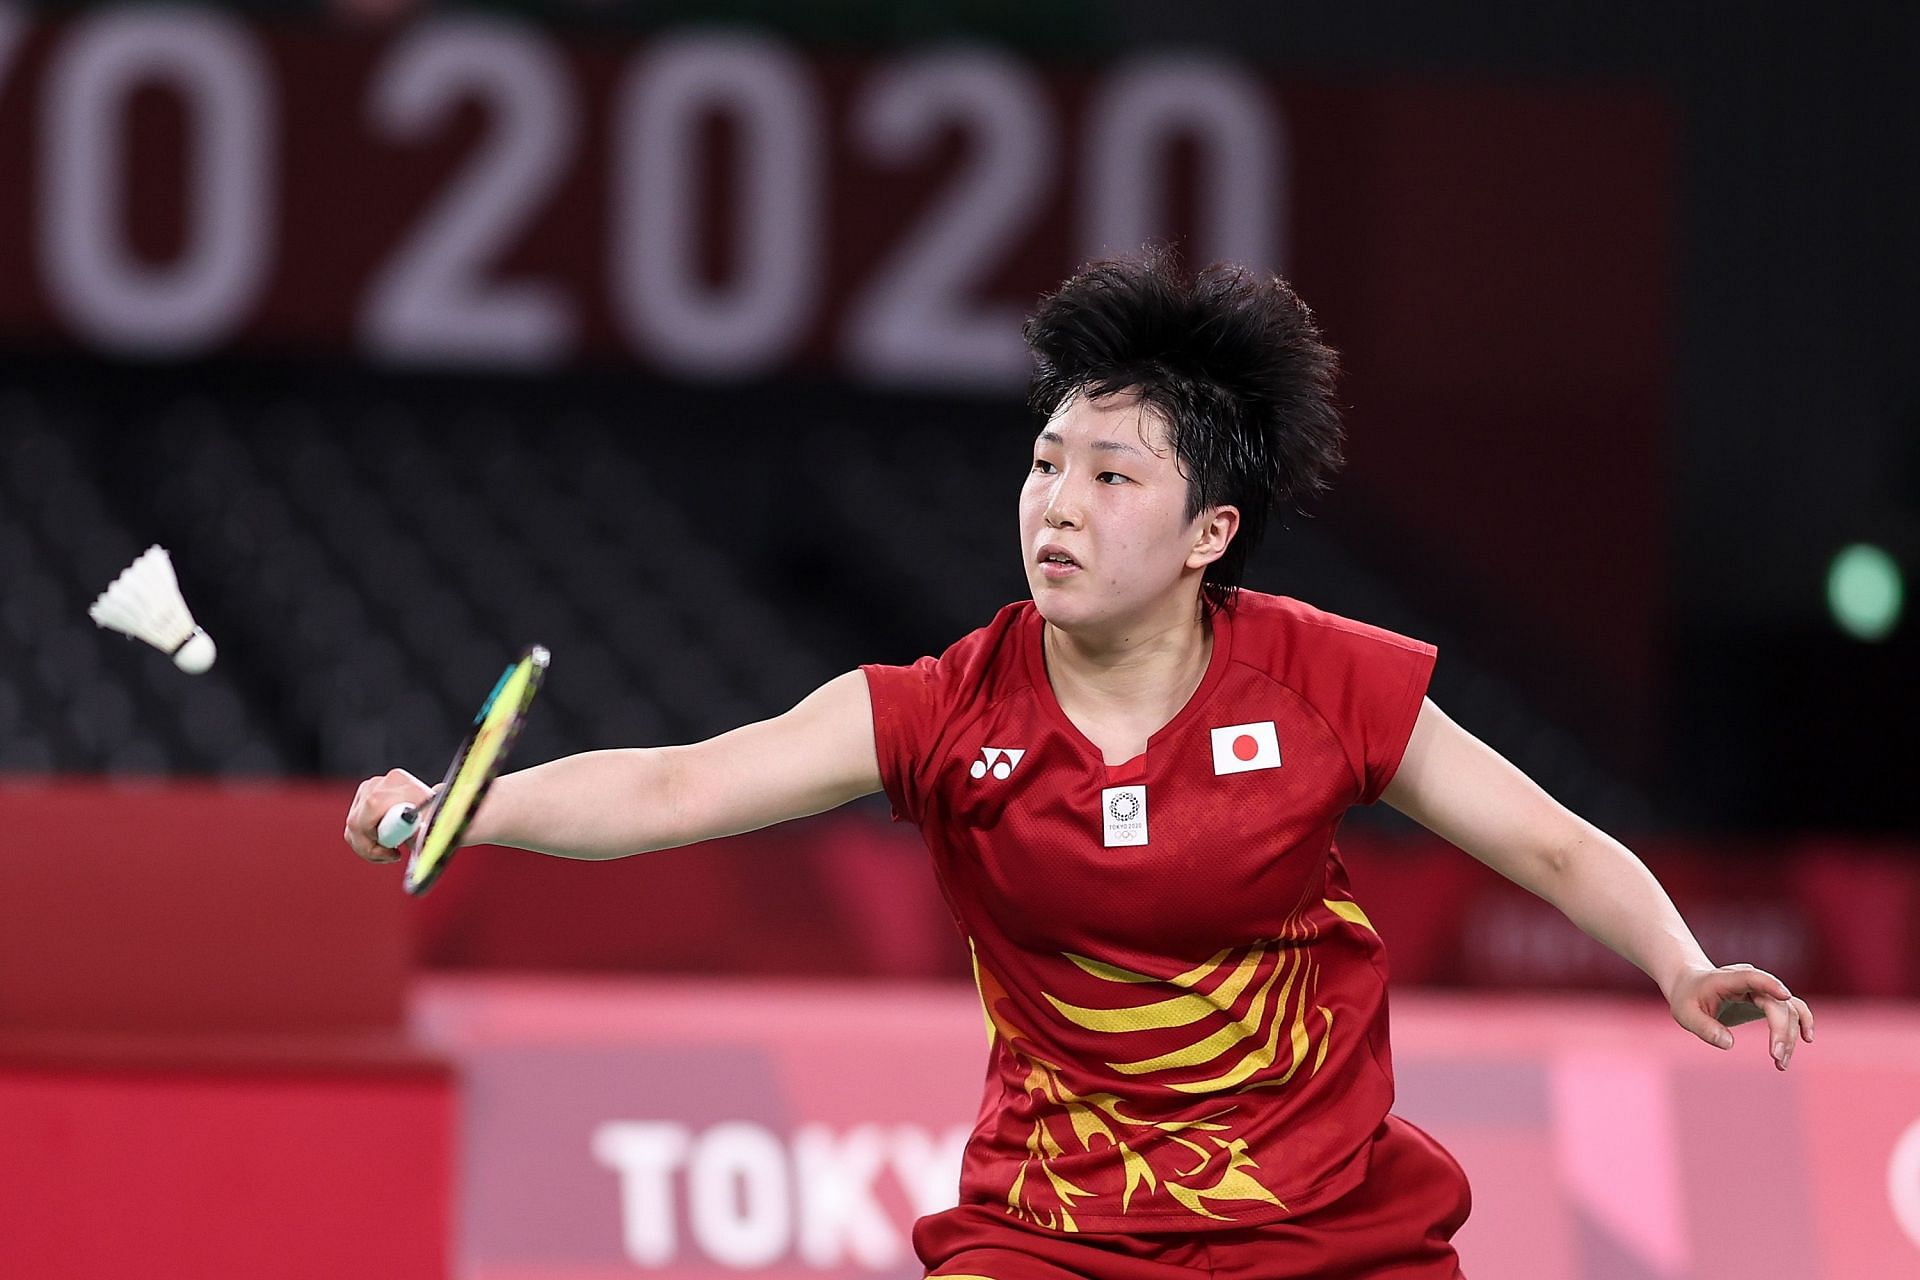 Akane Yamaguchi in action at the Tokyo Olympics